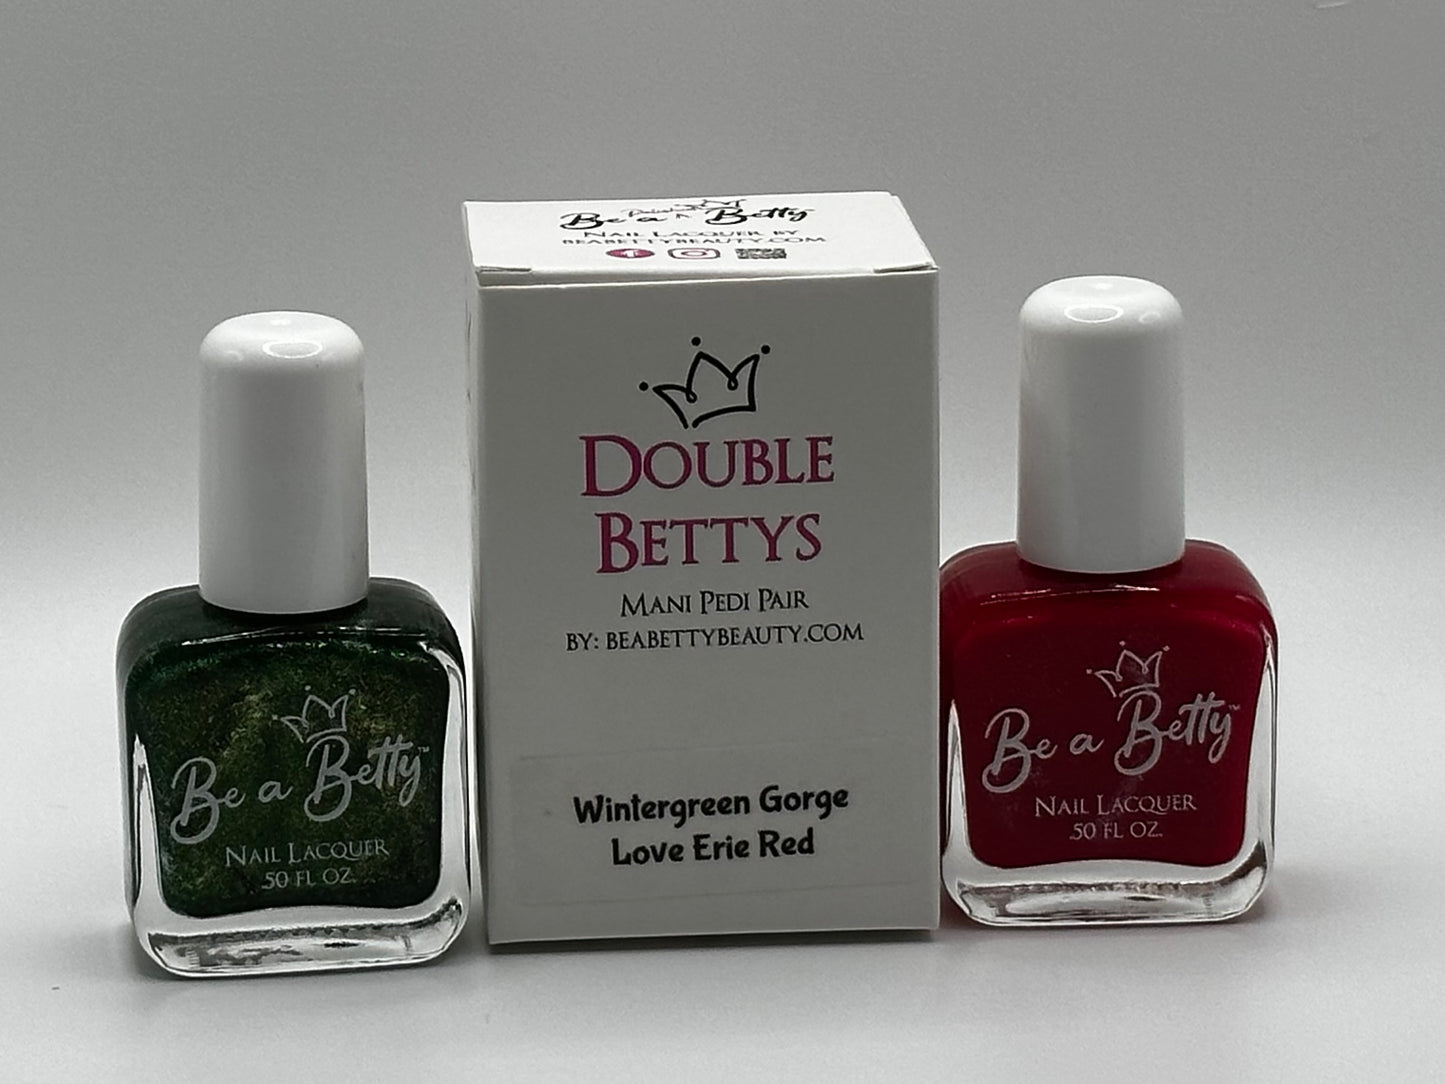 Double Bettys-Love Erie Red & Wintergreen Gorge